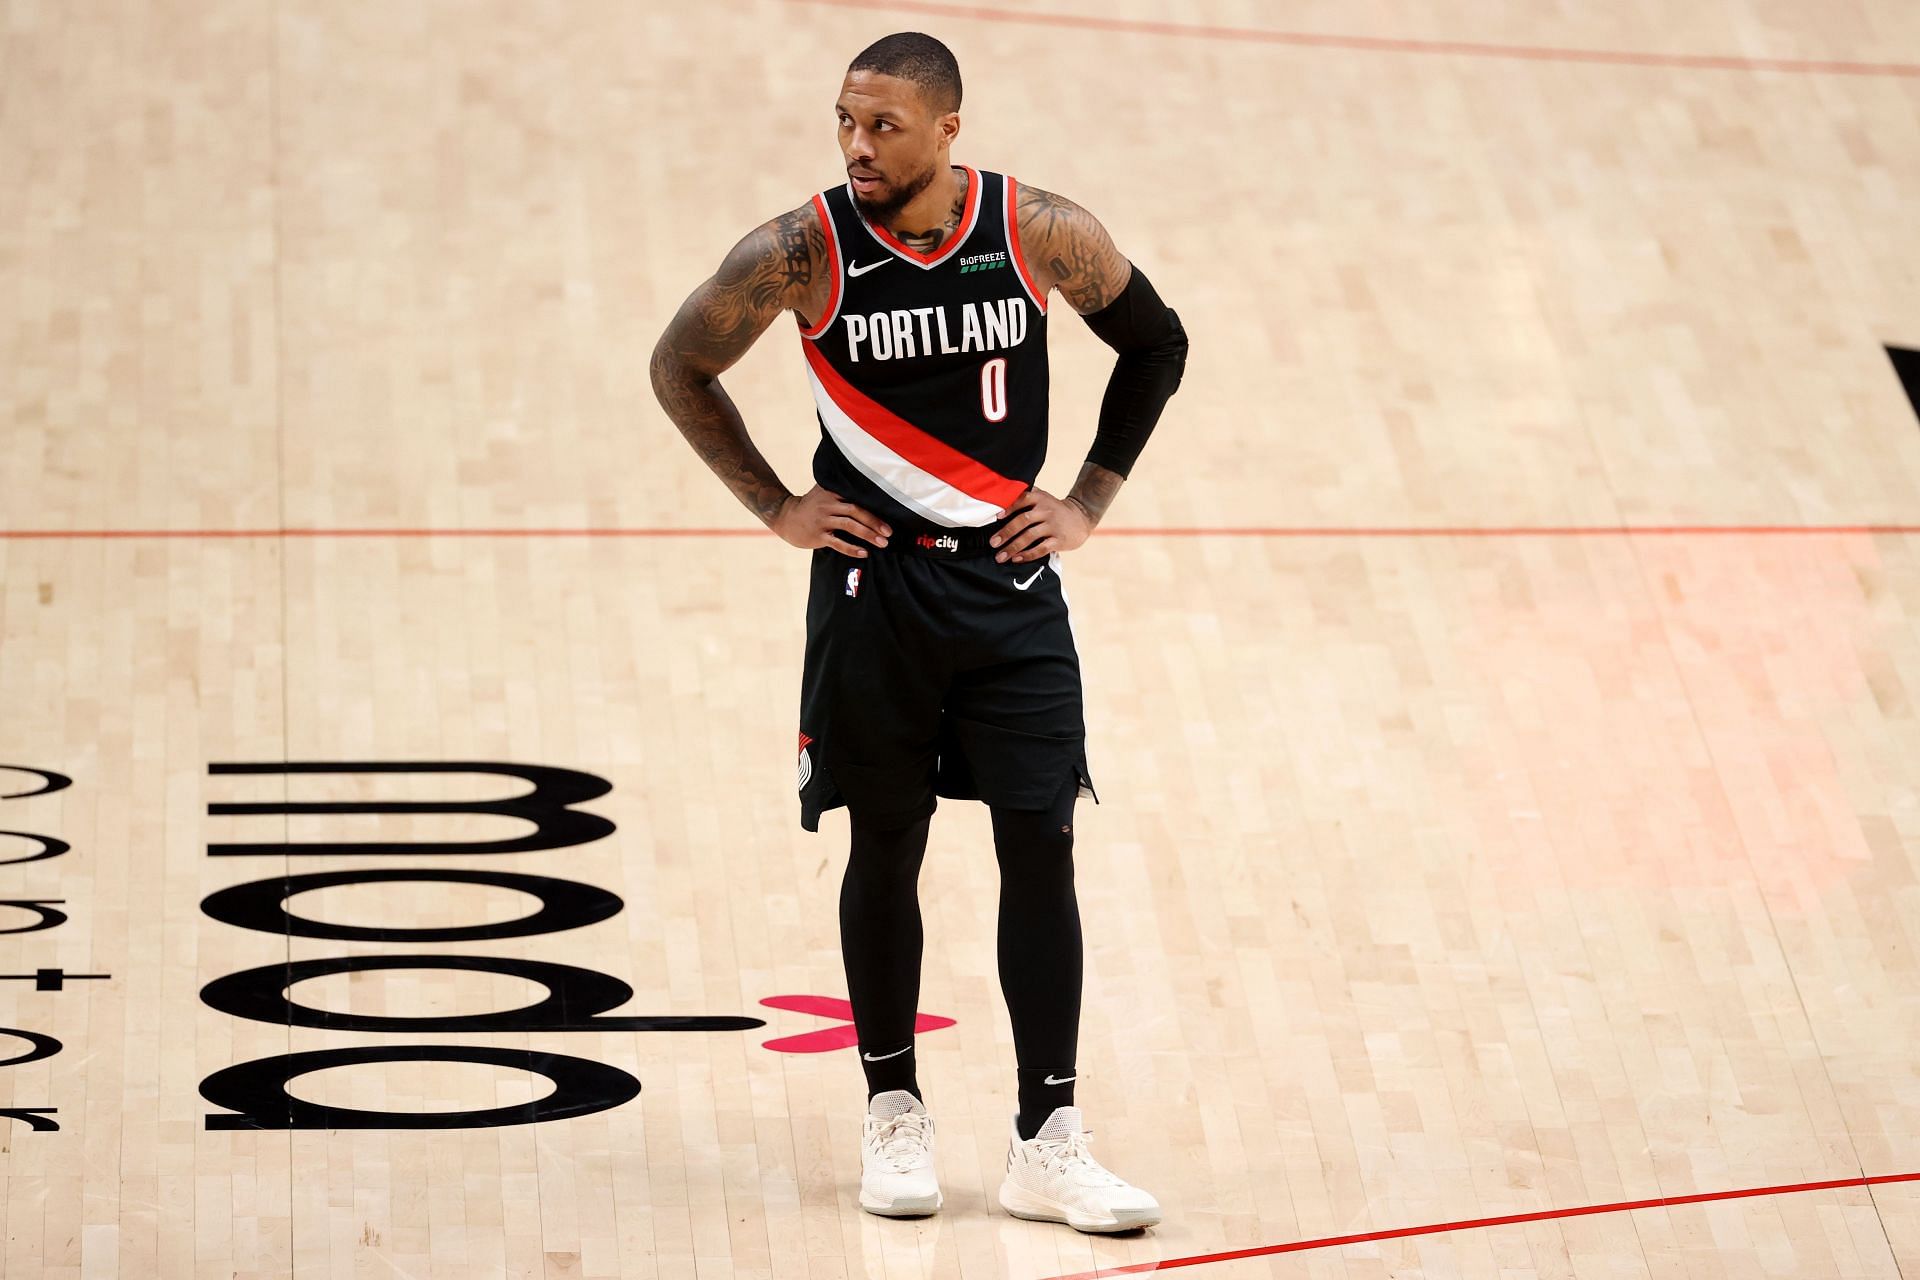 Franchise Records Held By Damian Lillard For The Portland Trail Blazers